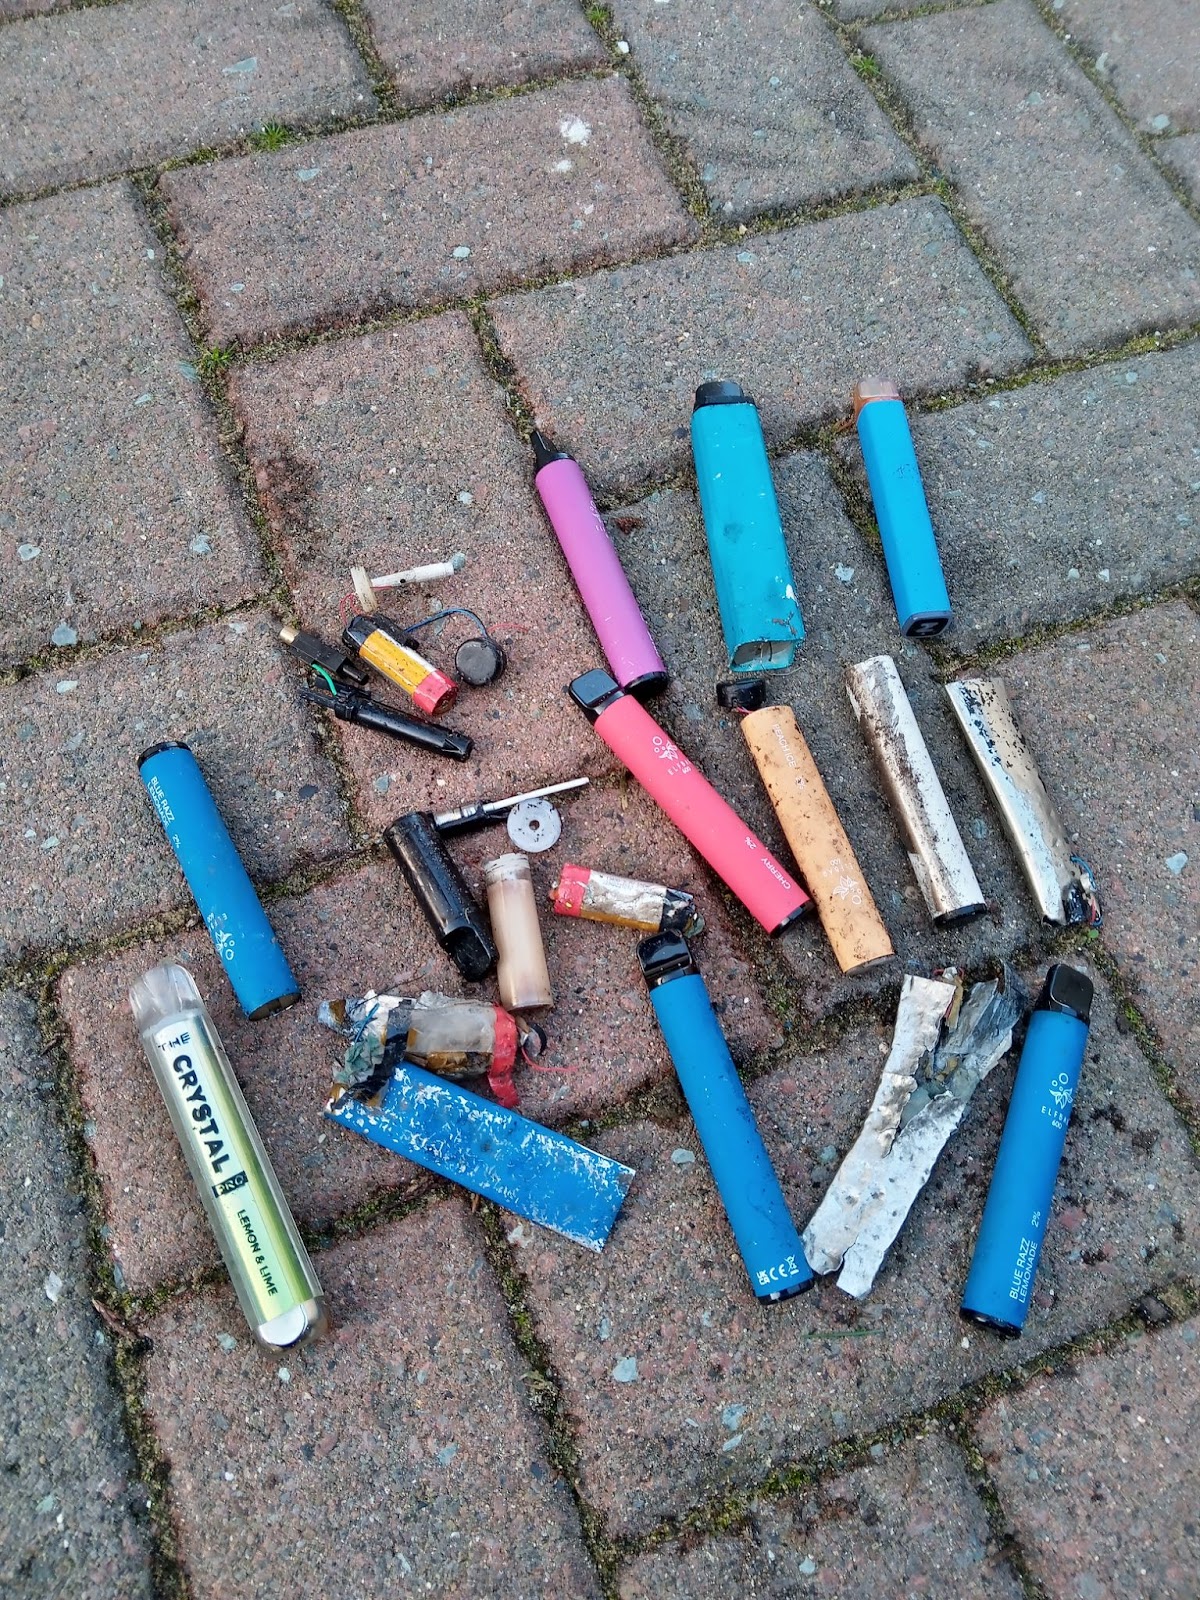 RSPCA urges litter-pickers to be on alert for discarded vapes